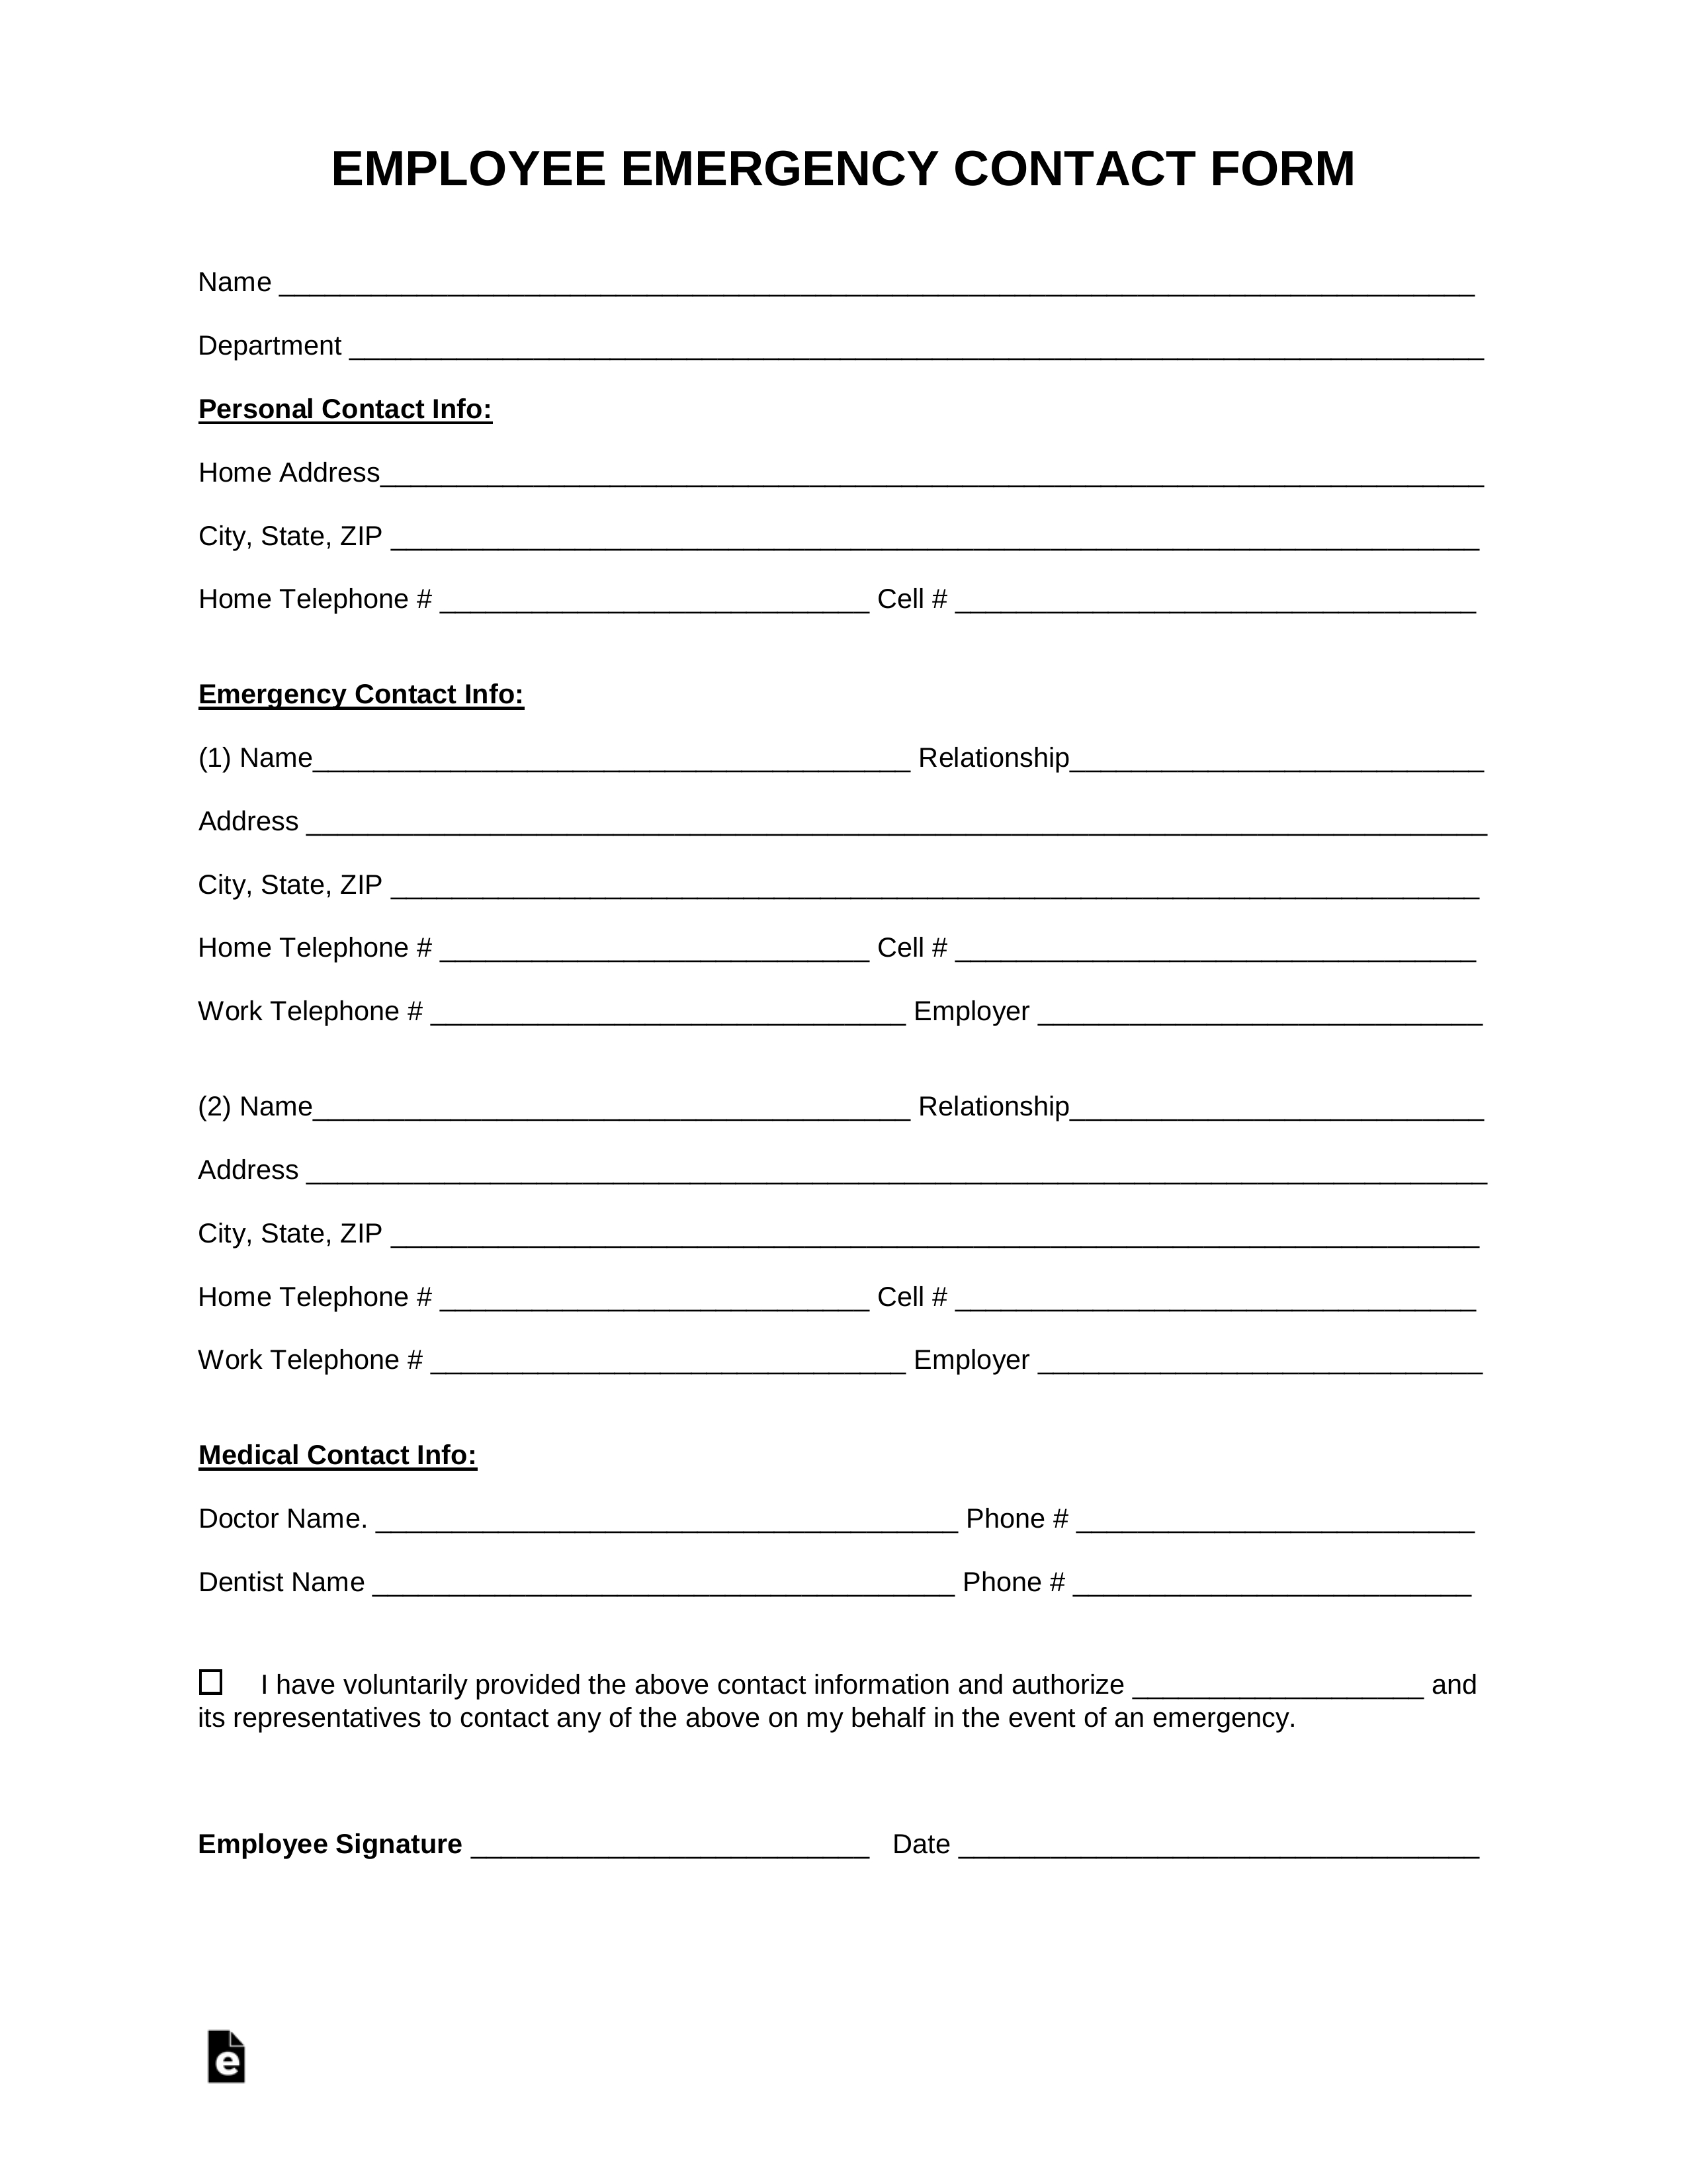 Free Employee Emergency Contact Form – Pdf | Word | Eforms Intended For Emergency Contact Card Template